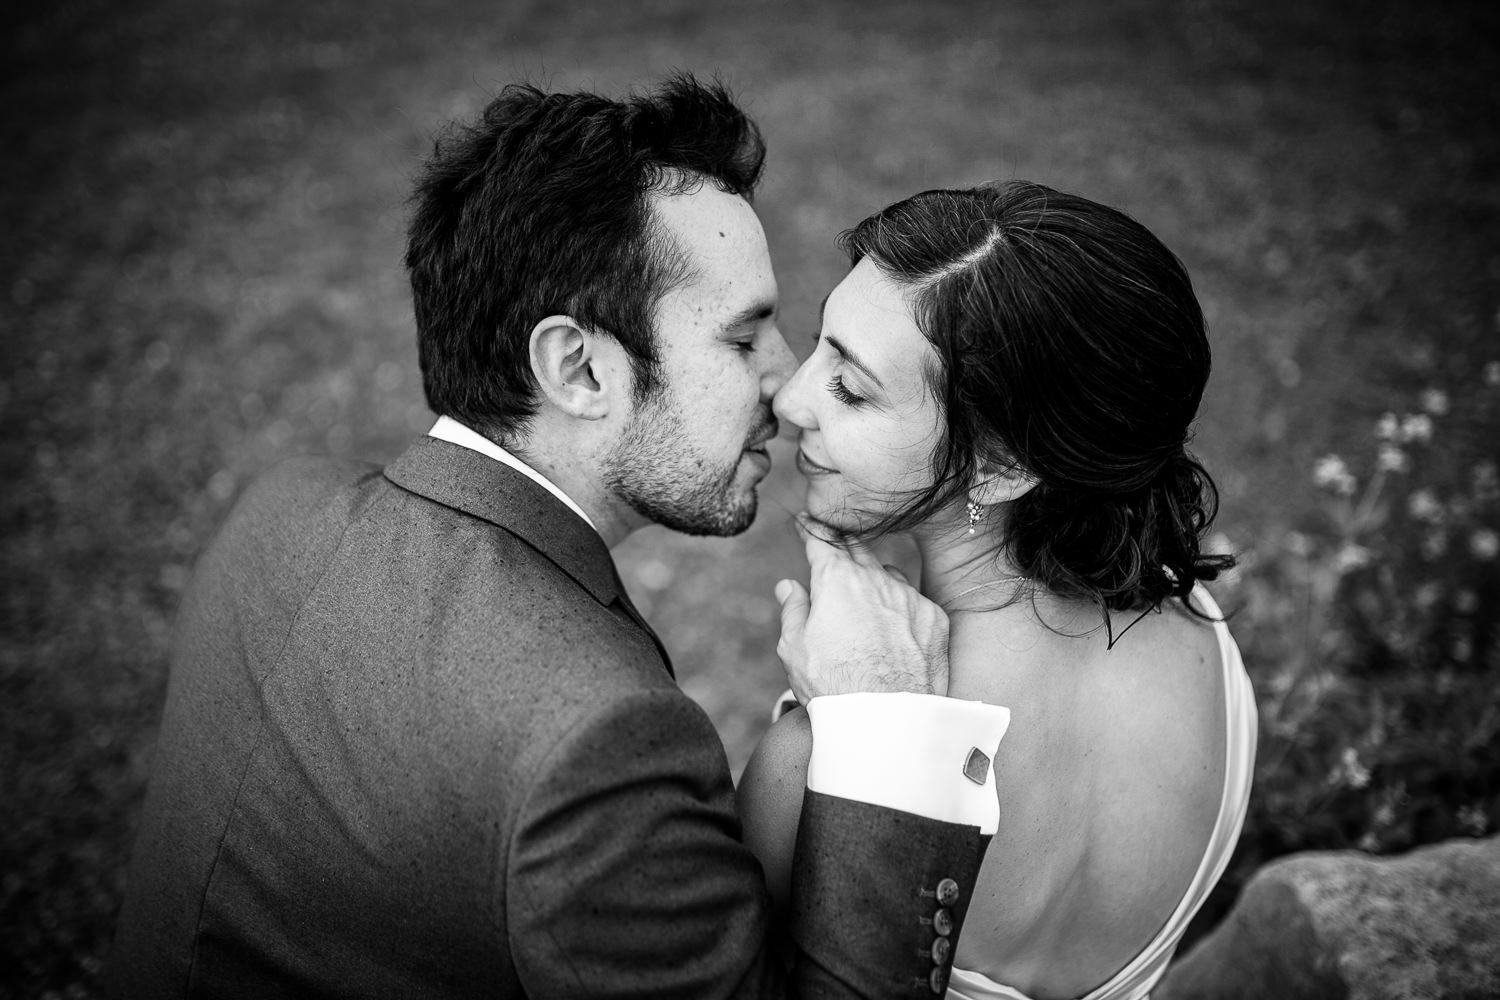 chicago best madison wisconsin wedding photographers artistic natural real